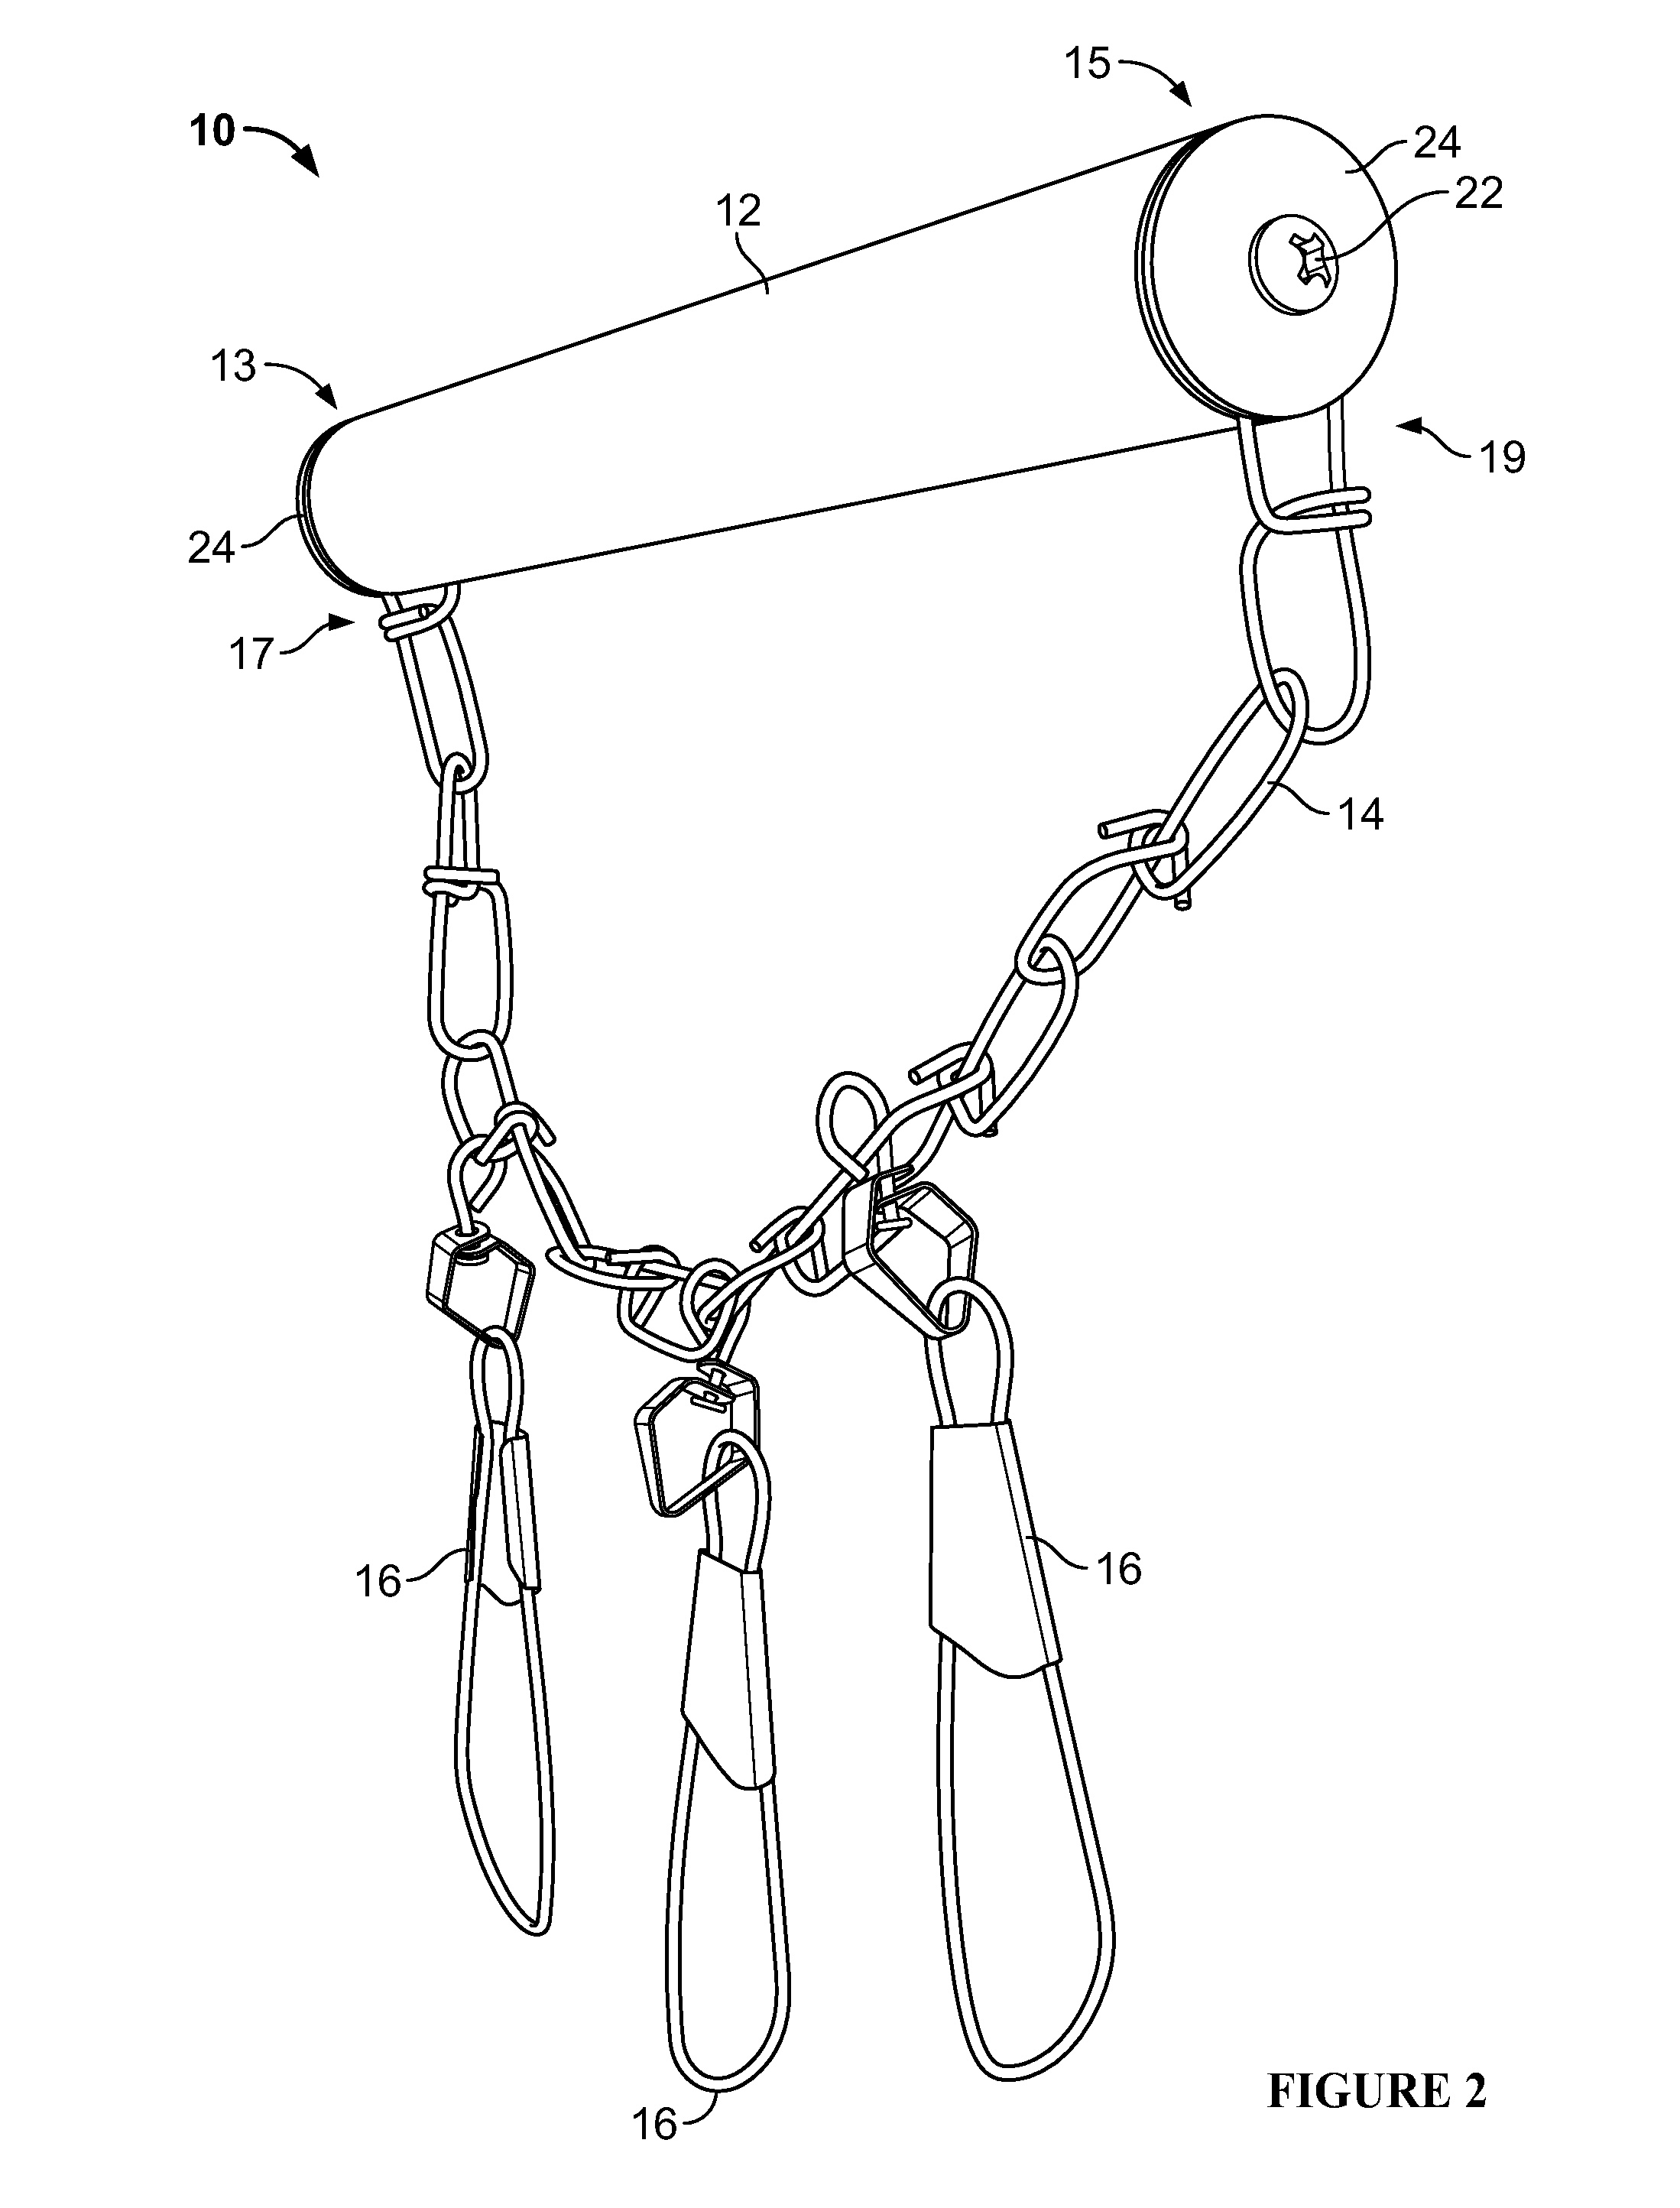 Fish retaining and transporting assemblies and methods of using the same